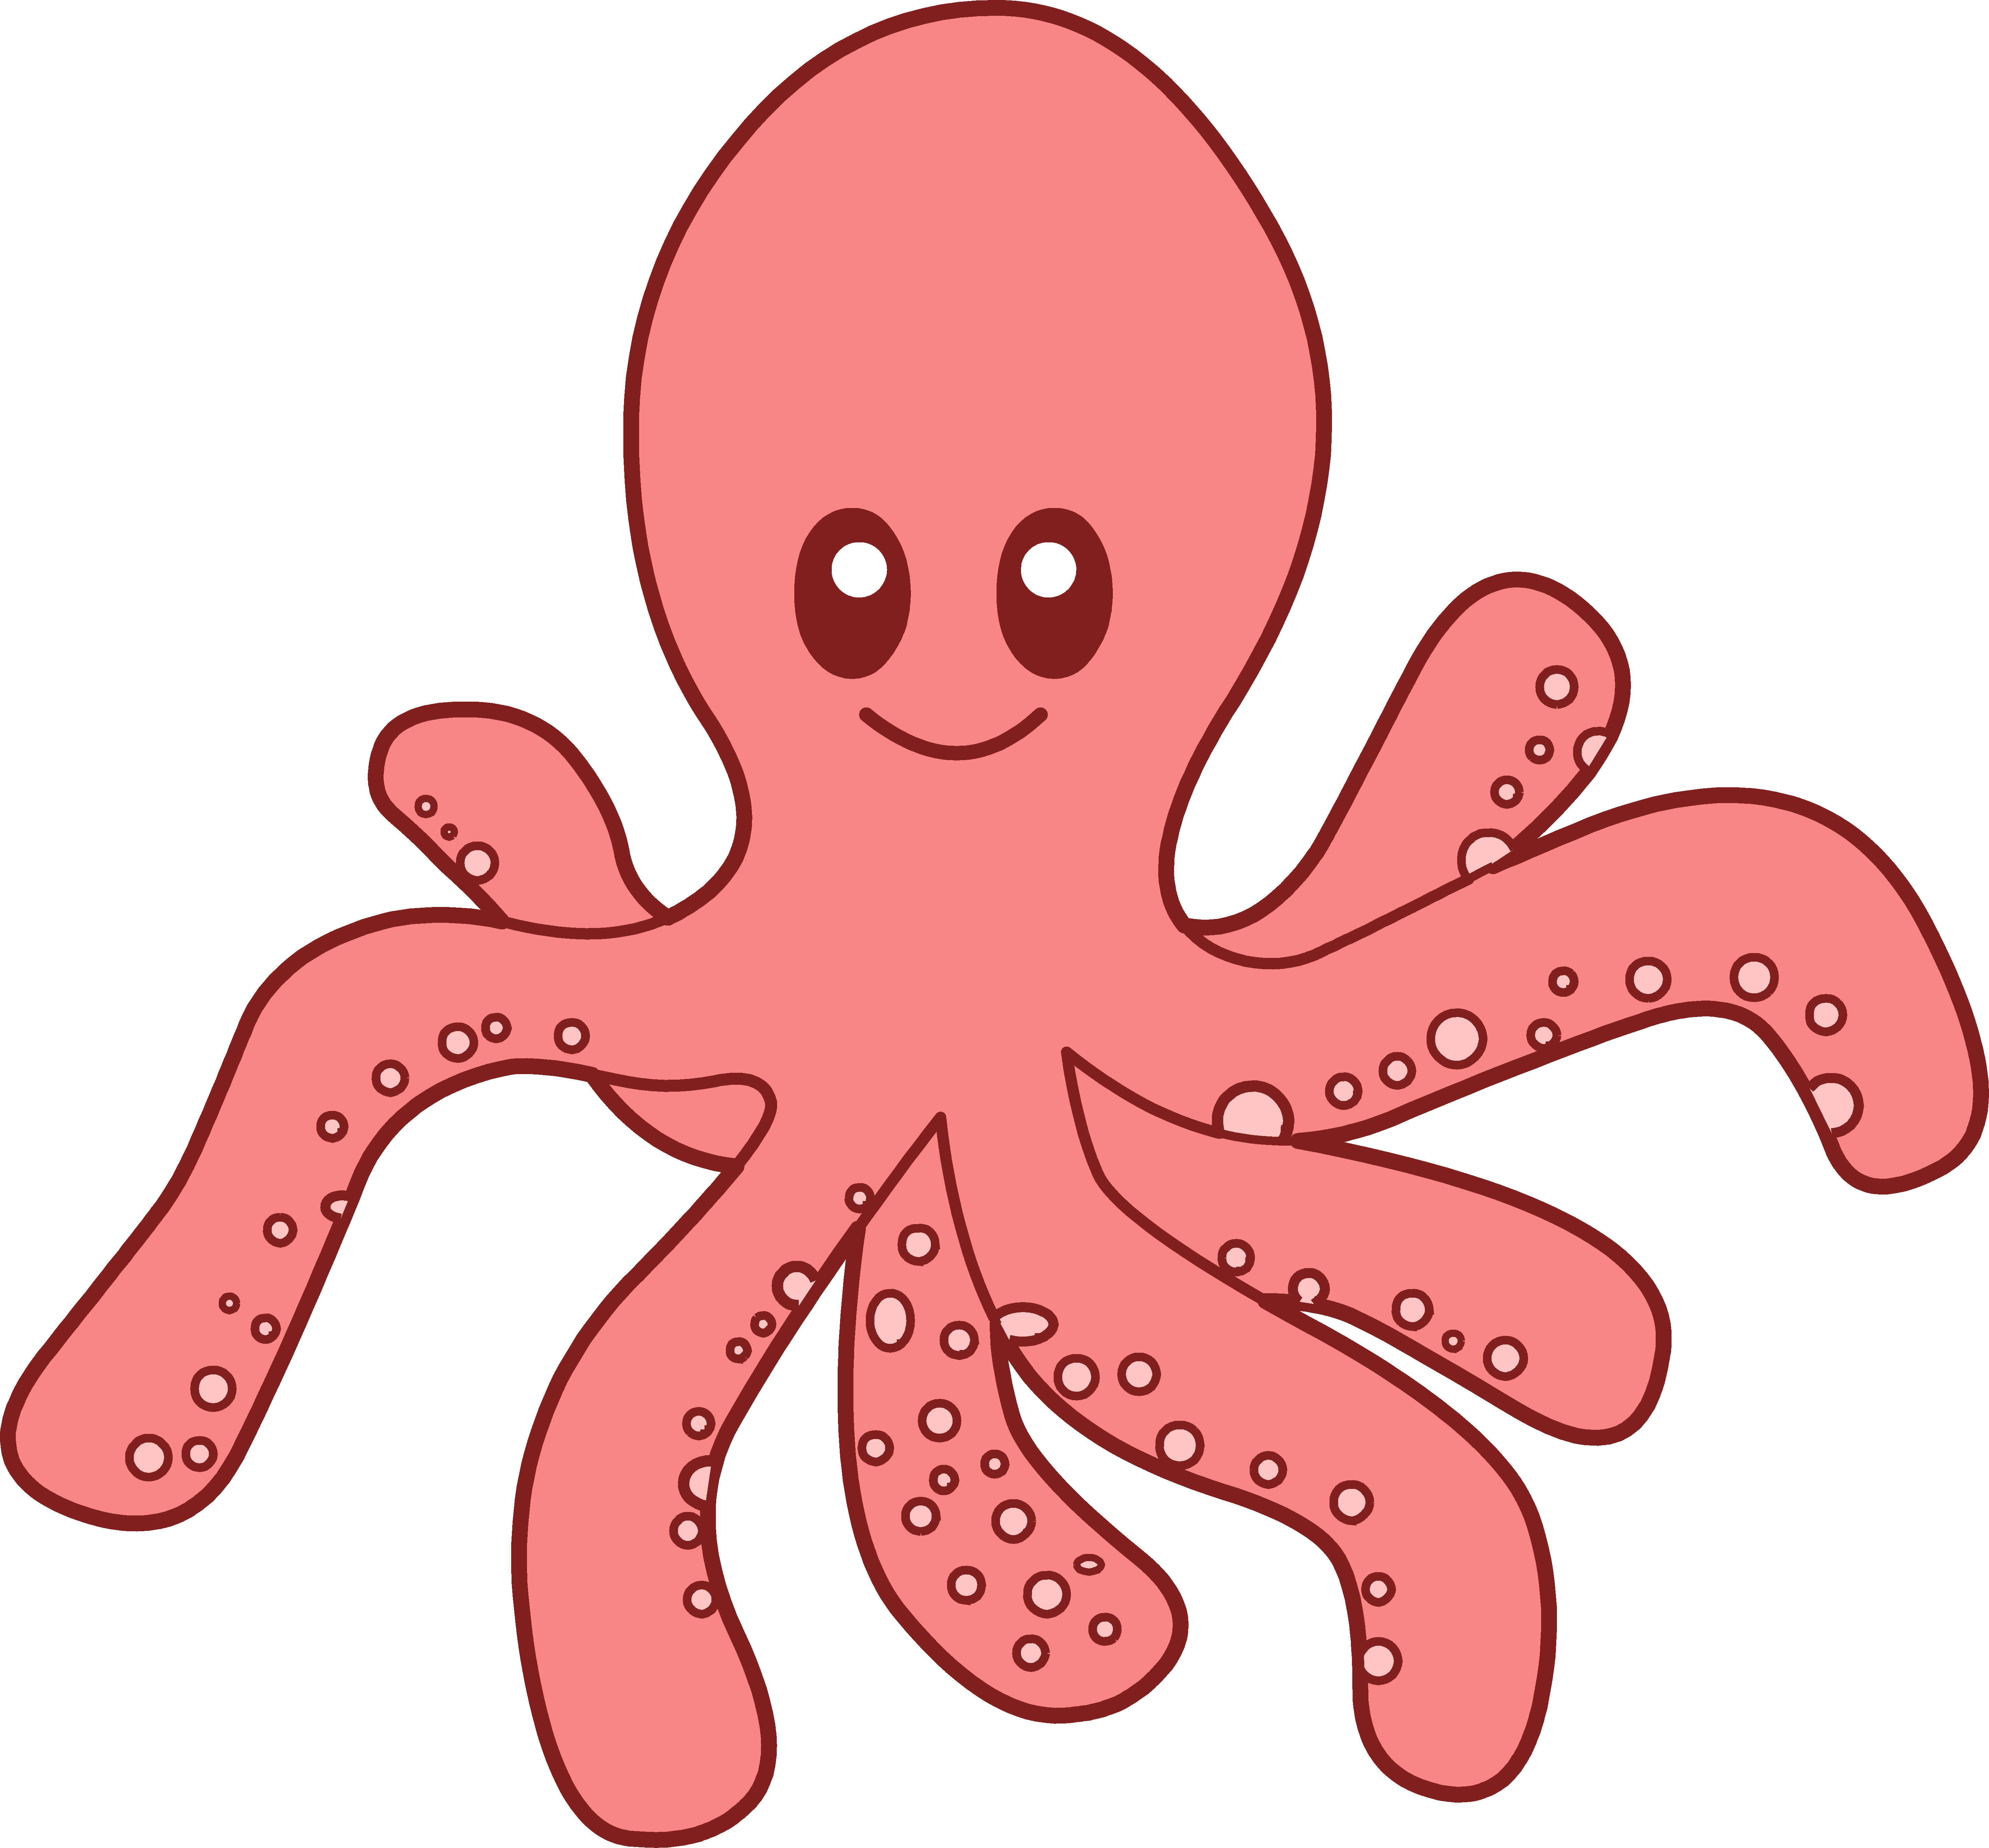 Cute Octopus Cartoon Drawing Images Pictures - Becuo